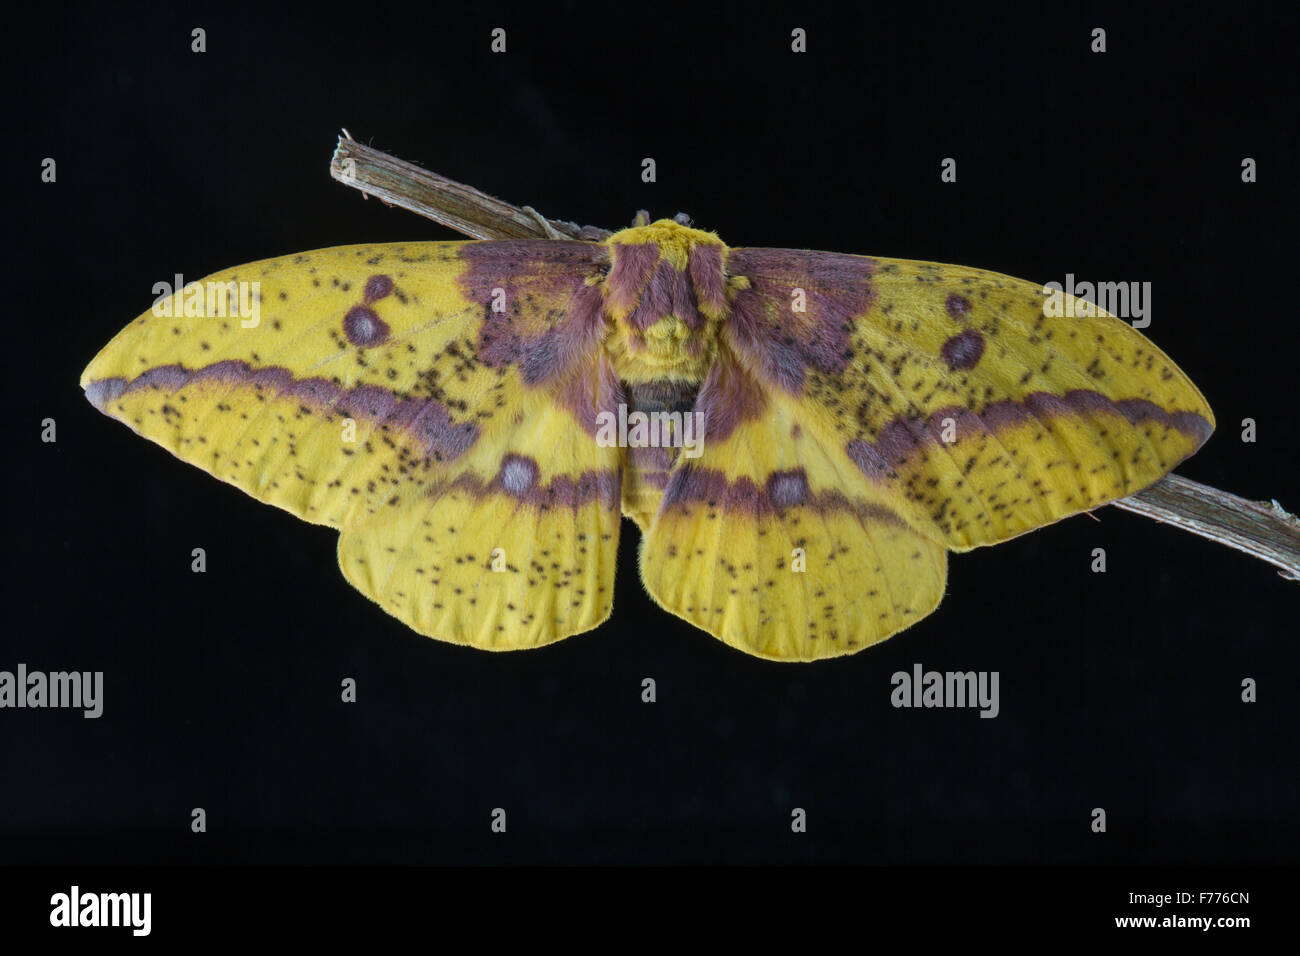 Imperial Moth, Eacles imperialis, on a black background Stock Photo